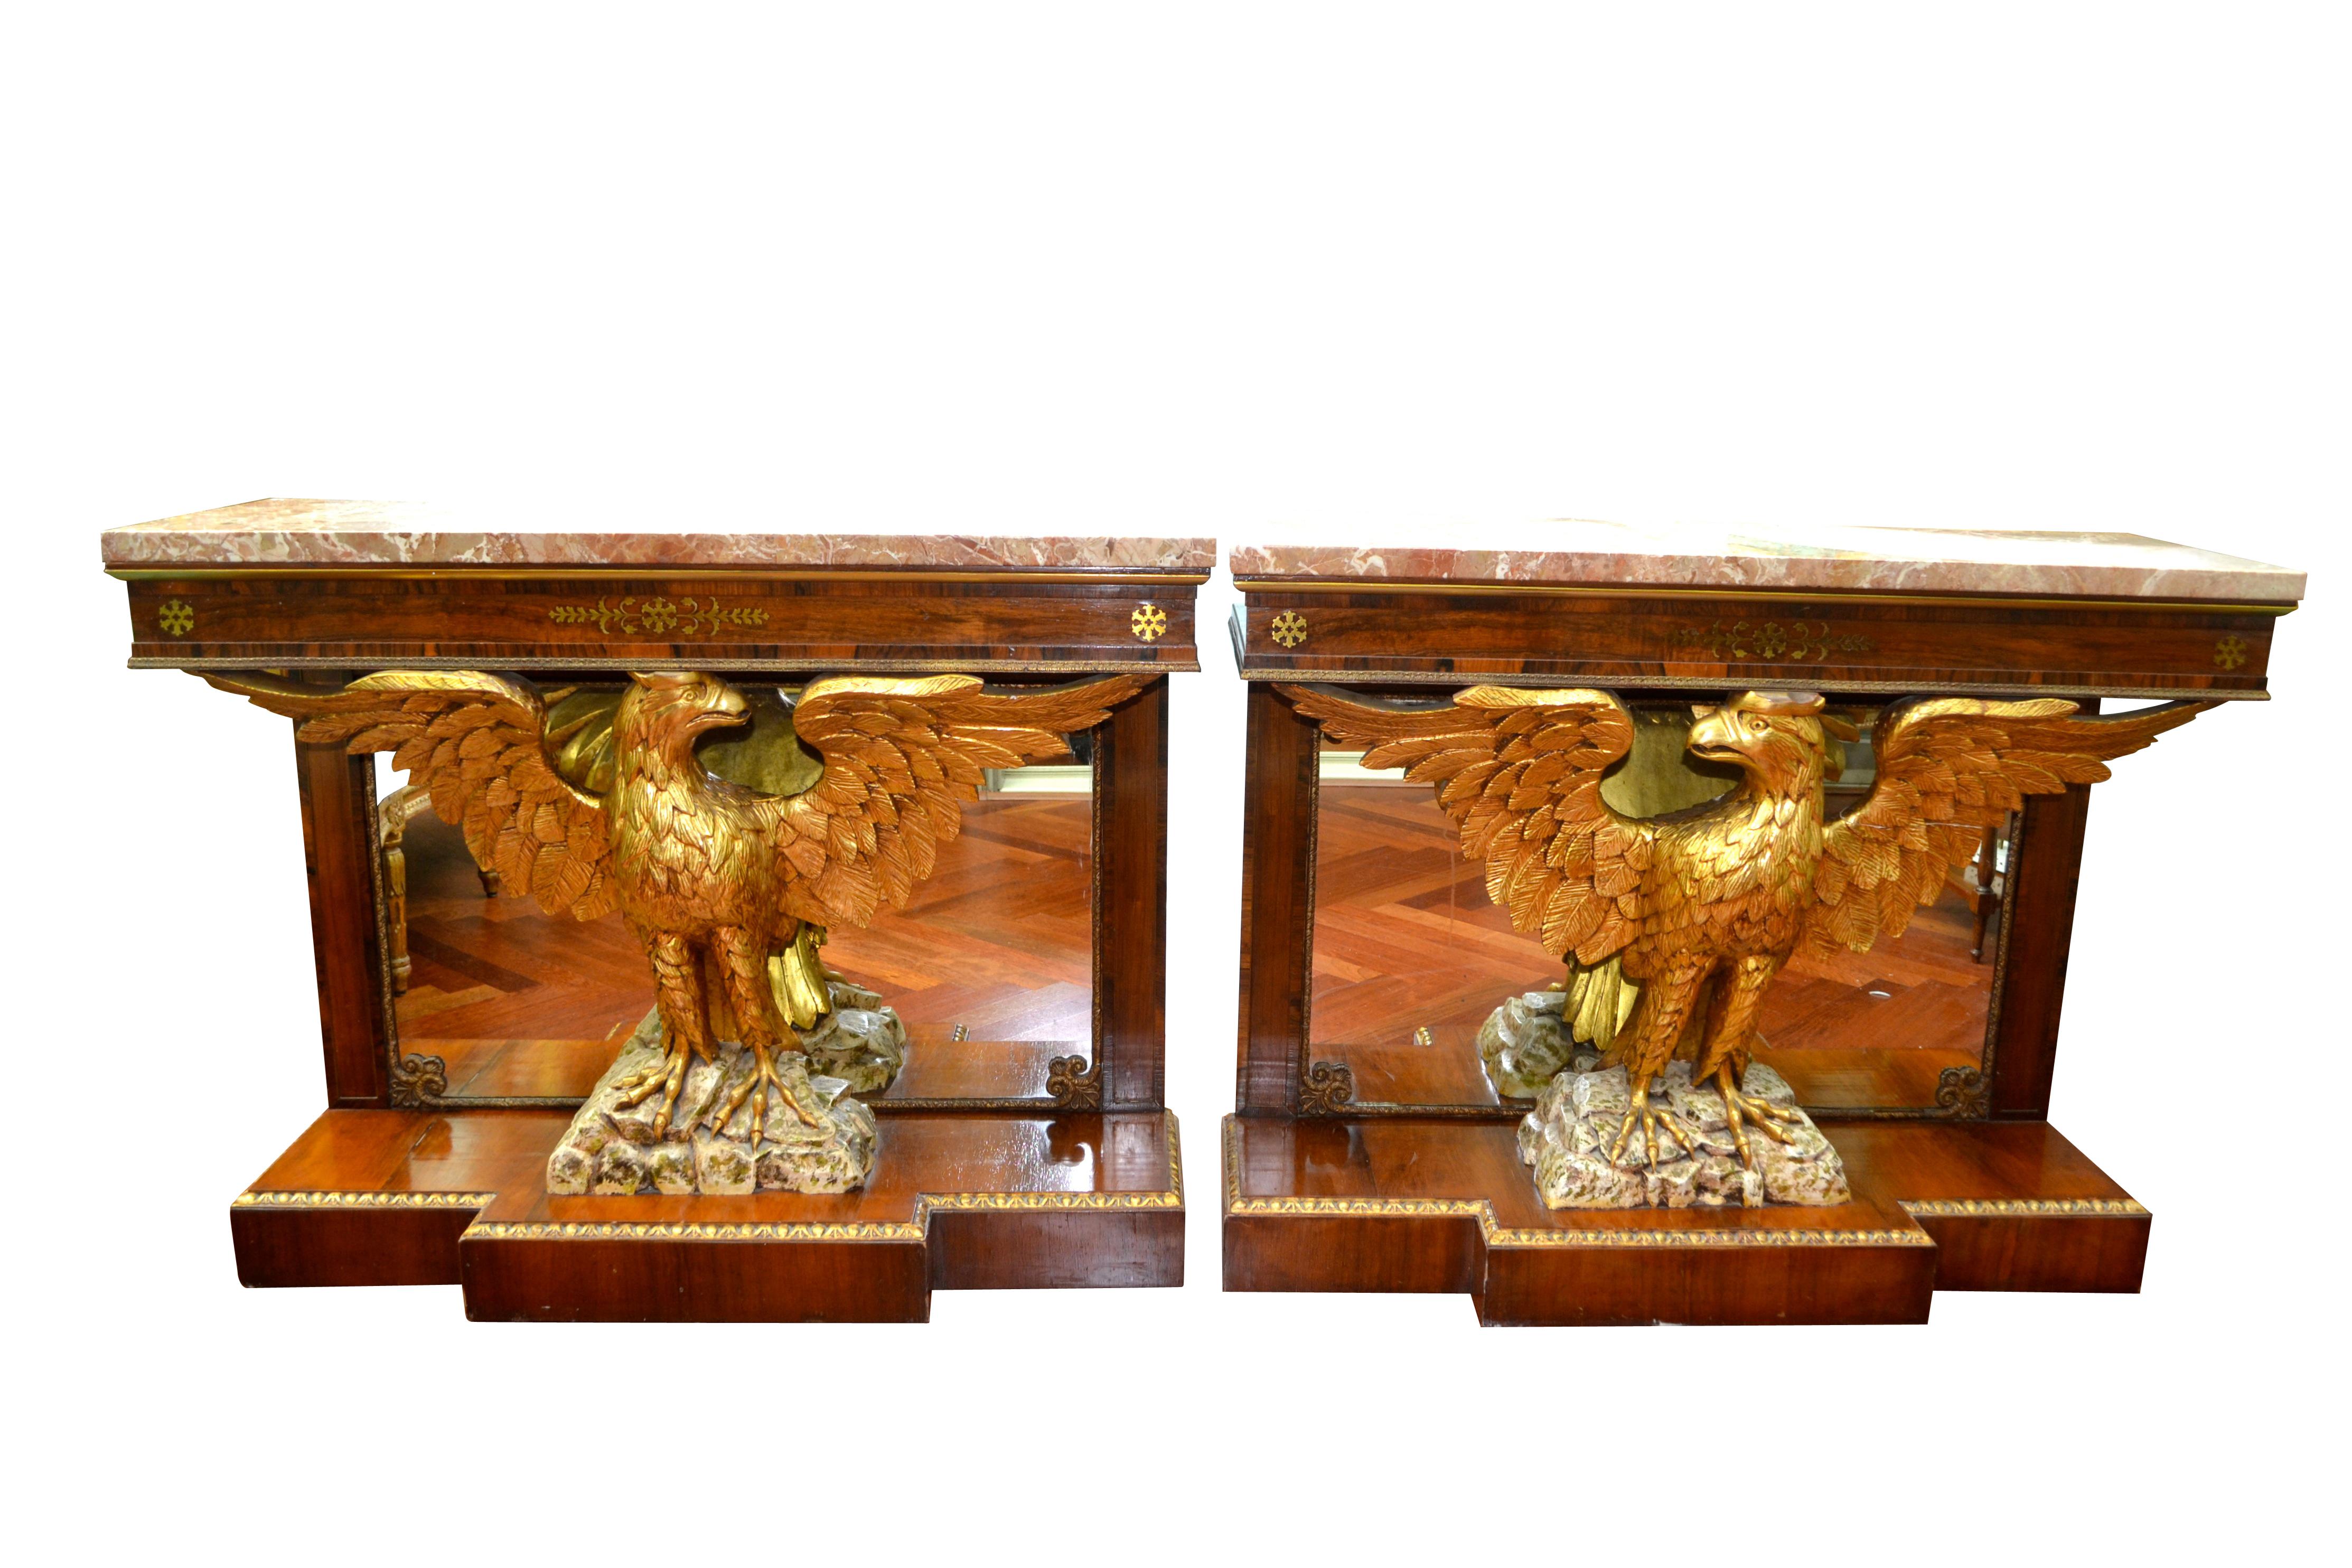 A pair of late 19th/early 20thC  English Regency style console tables in mahogany with brass inlay, gilded wood, and Breccia marble tops. The tops are each supported by carved and gilded wood eagle with their wings spread perched  on a  simulated